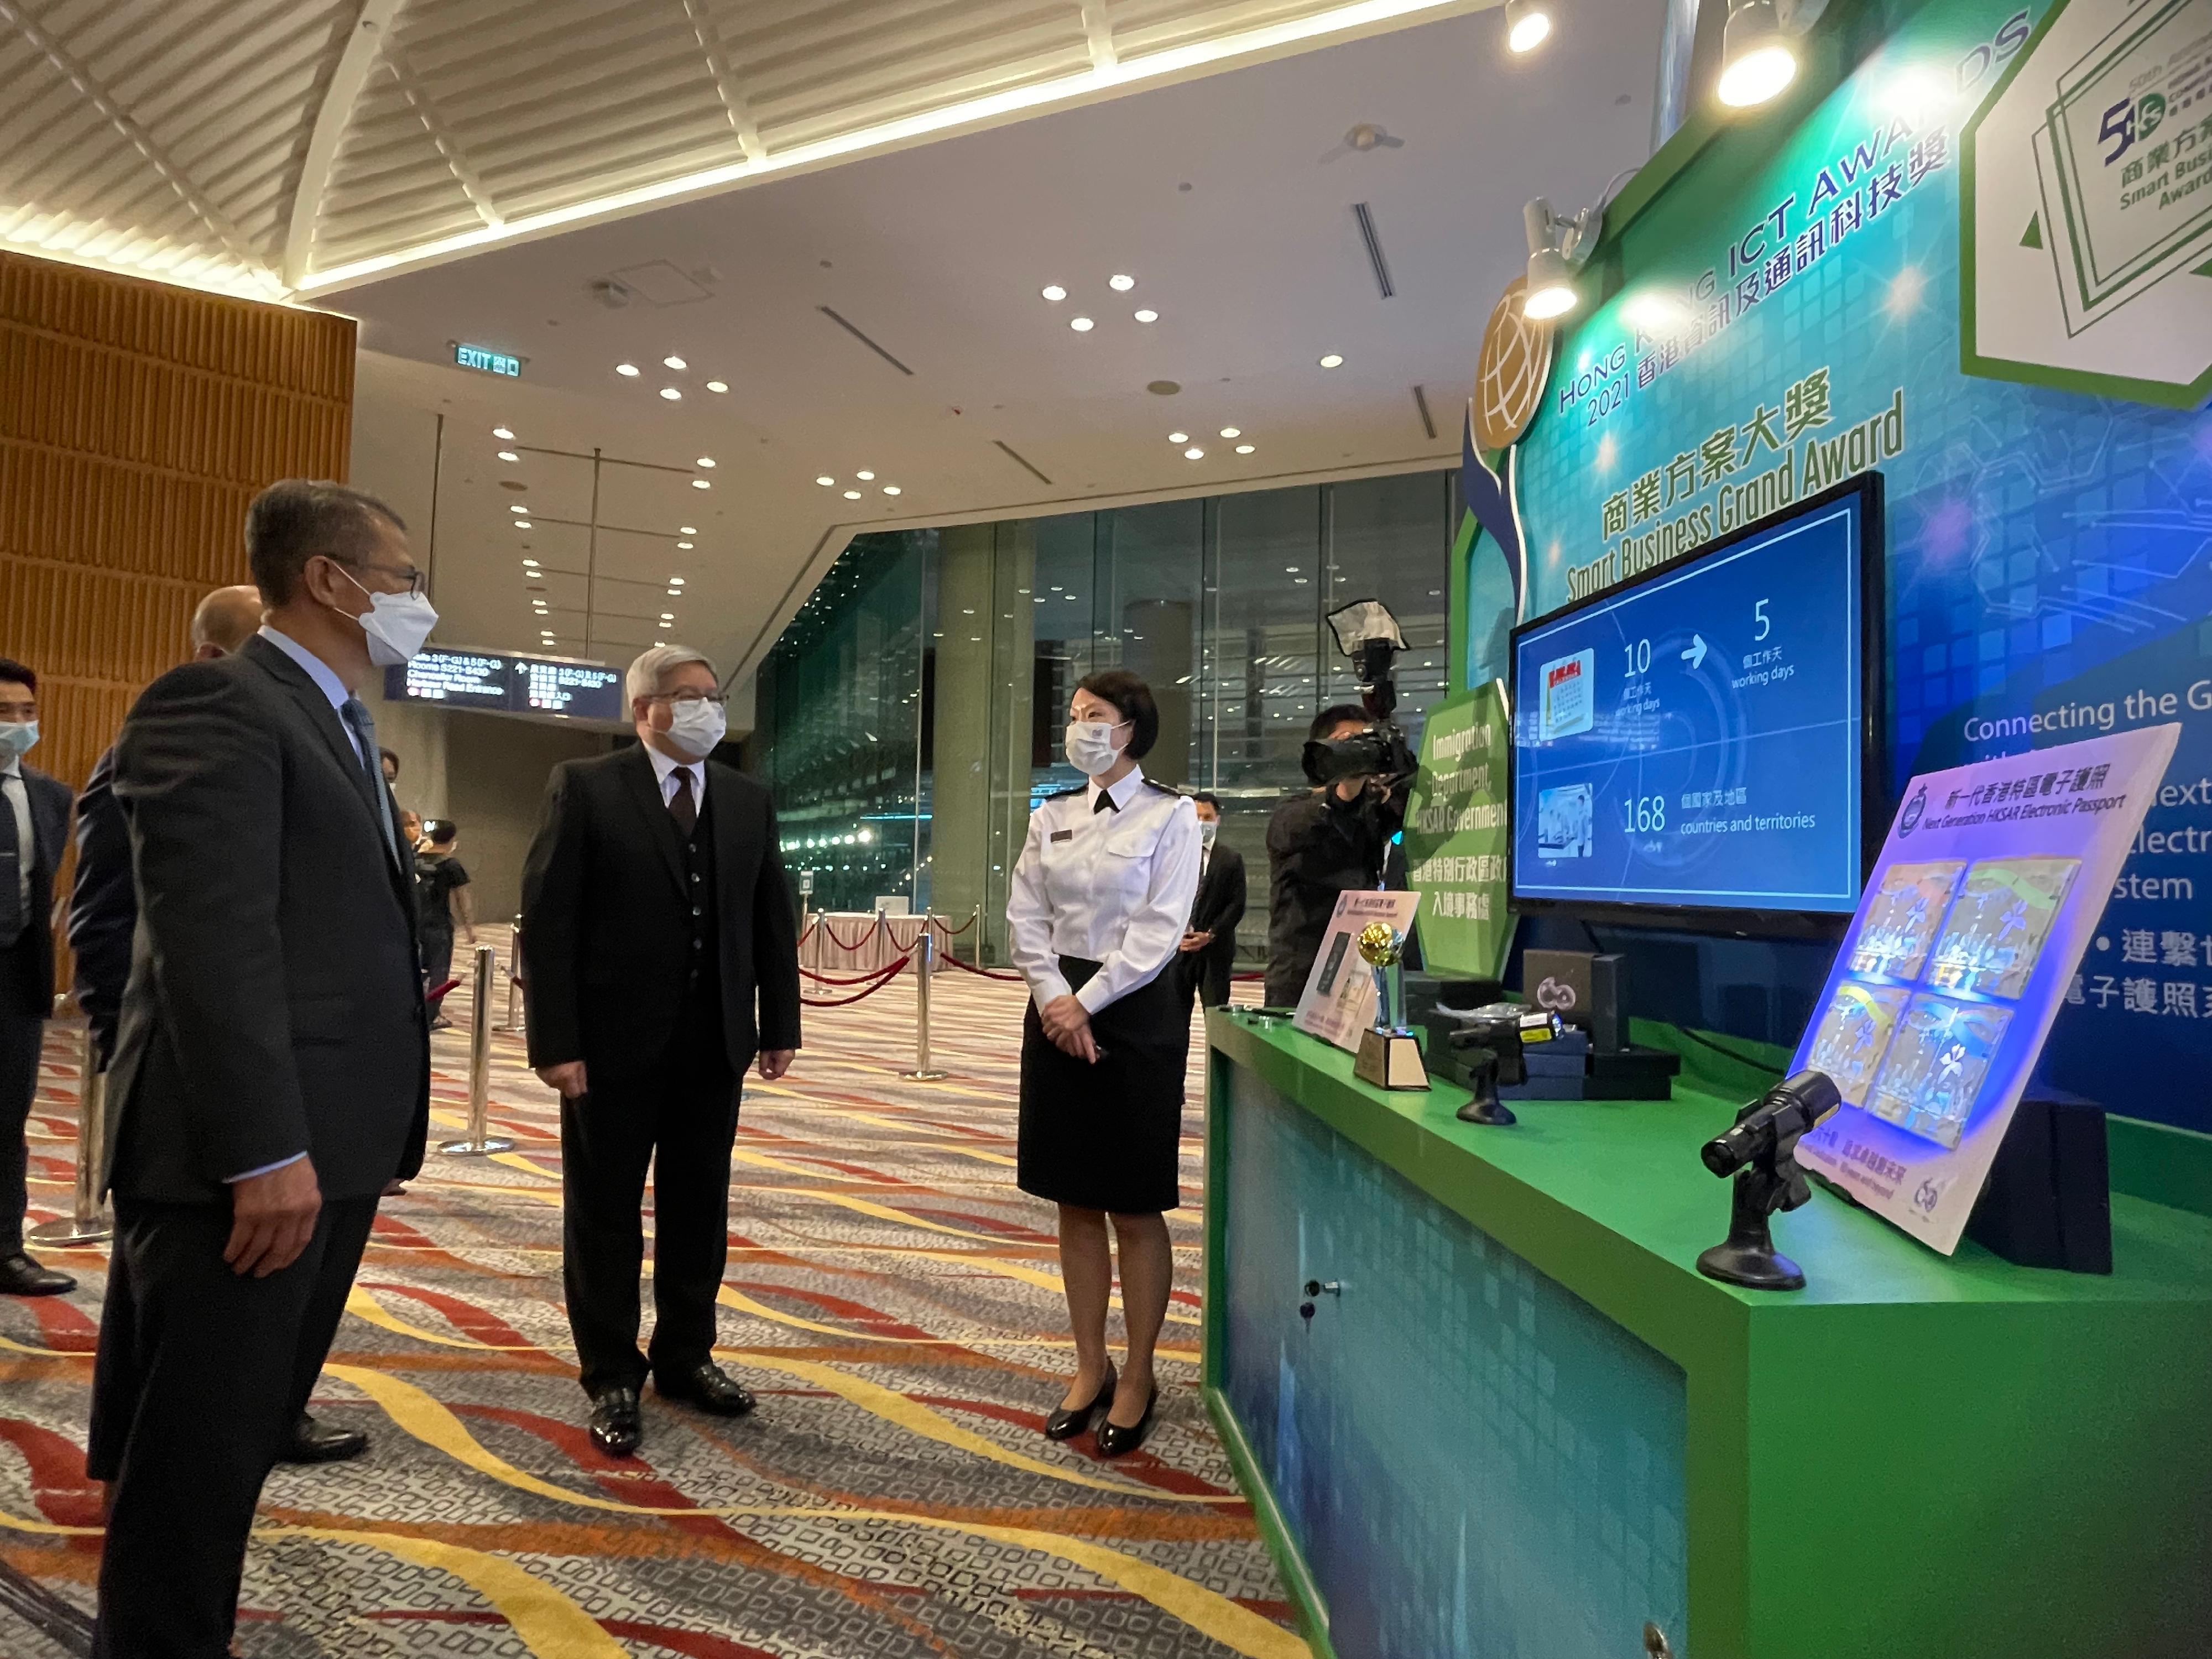 The Director of Immigration, Mr Au Ka-wang (centre), accompanies the Financial Secretary, Mr Paul Chan (left) at the Hong Kong ICT Awards 2021 Awards Presentation Ceremony this evening (November 29) to listen to an Immigration officer introducing the Next Generation Electronic Passport System.